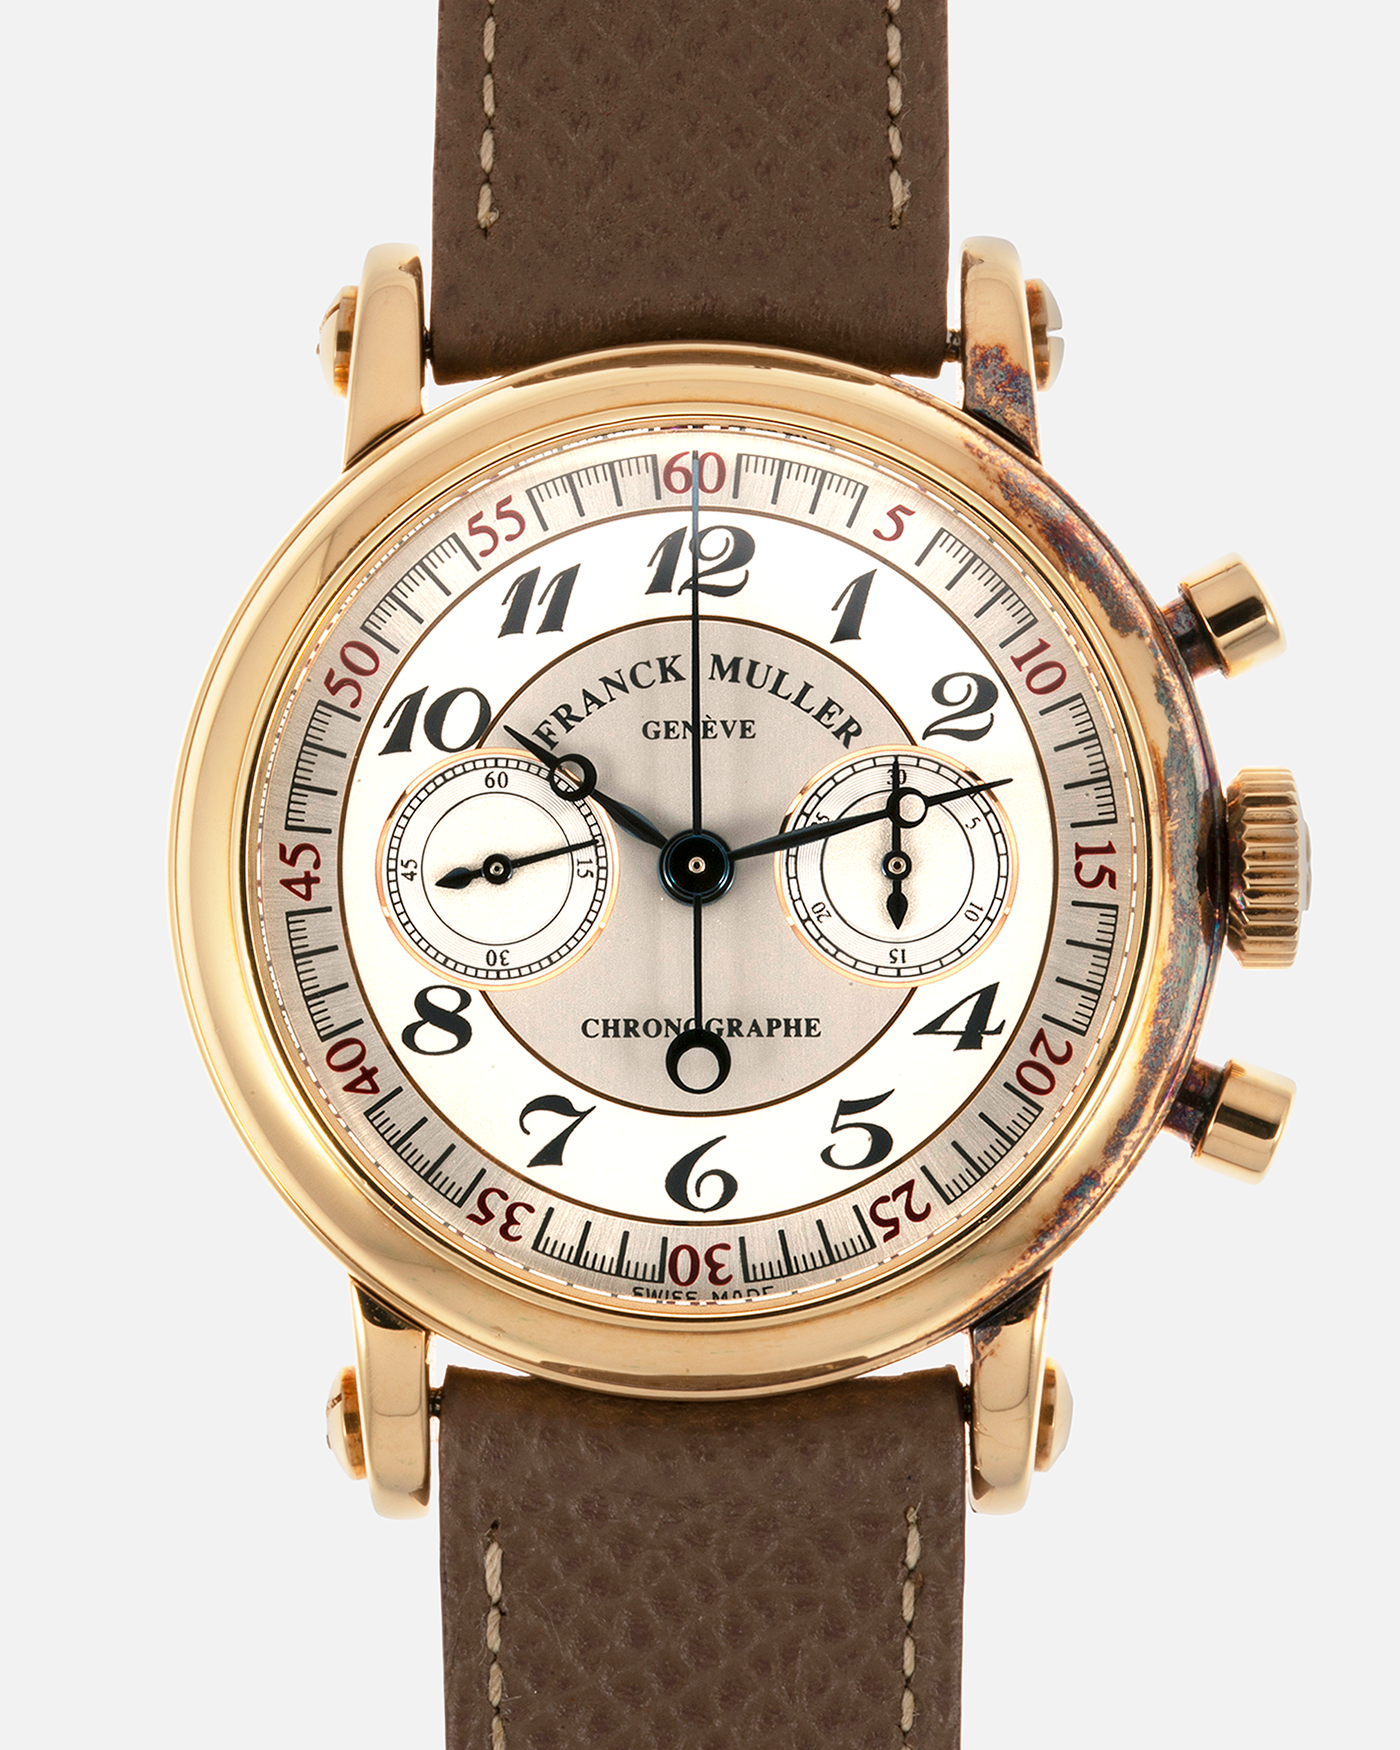 Brand: Franck Muller Year: 2000’s Model: Chronographe Double Face Reference: 2870 NA DF Material: 18-carat Yellow Gold Movement: Lemania Cal. 1872, Manual-Winding Case Diameter: 37mm Strap: Nostime Sand Tan Suede Calf Leather Strap with Signed 18-carat Tang Buckle, Additional Franck Muller Black Alligator Leather Strap.